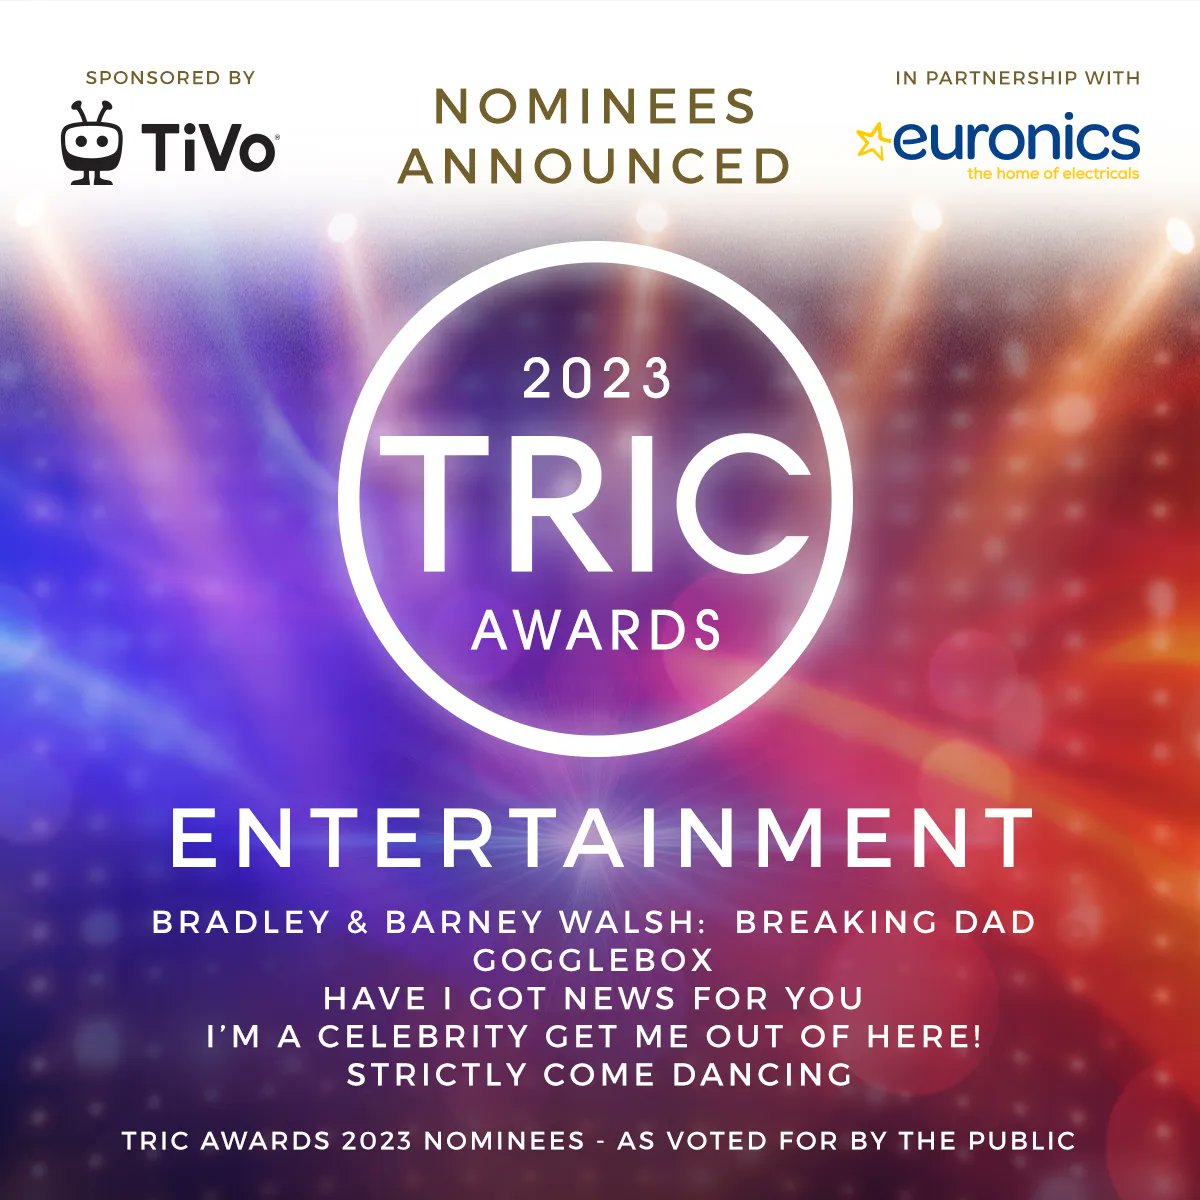 Exciting News for the 2023 #TRICawards in partnership with @euronics_UK 

The nominees in the Entertainment Category, voted for by you, are…

Bradley & Barney Walsh: Breaking Dad
@C4Gogglebox 
@haveigotnews
@imacelebrity
@bbcstrictly

Sponsored by @TiVo 
buff.ly/2Vye1eK